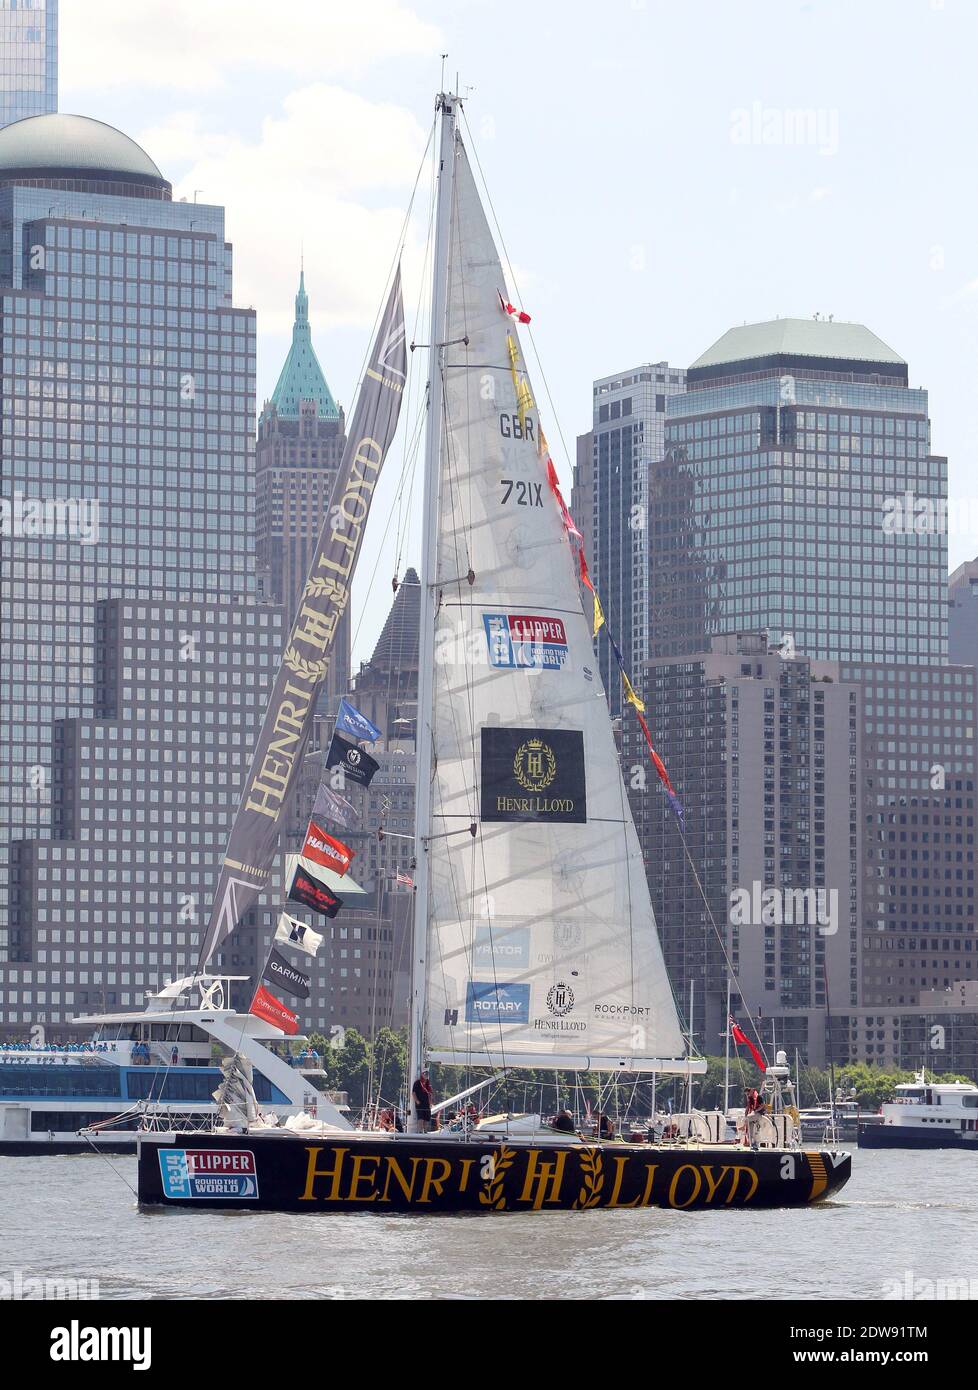 Henri Lloyd during the Clipper 2013-14 Round the World Yacht Race in  Manhattan, New York, NY on June 7, 2014. This is the world?s longest ocean  race at 40,000 miles and 11